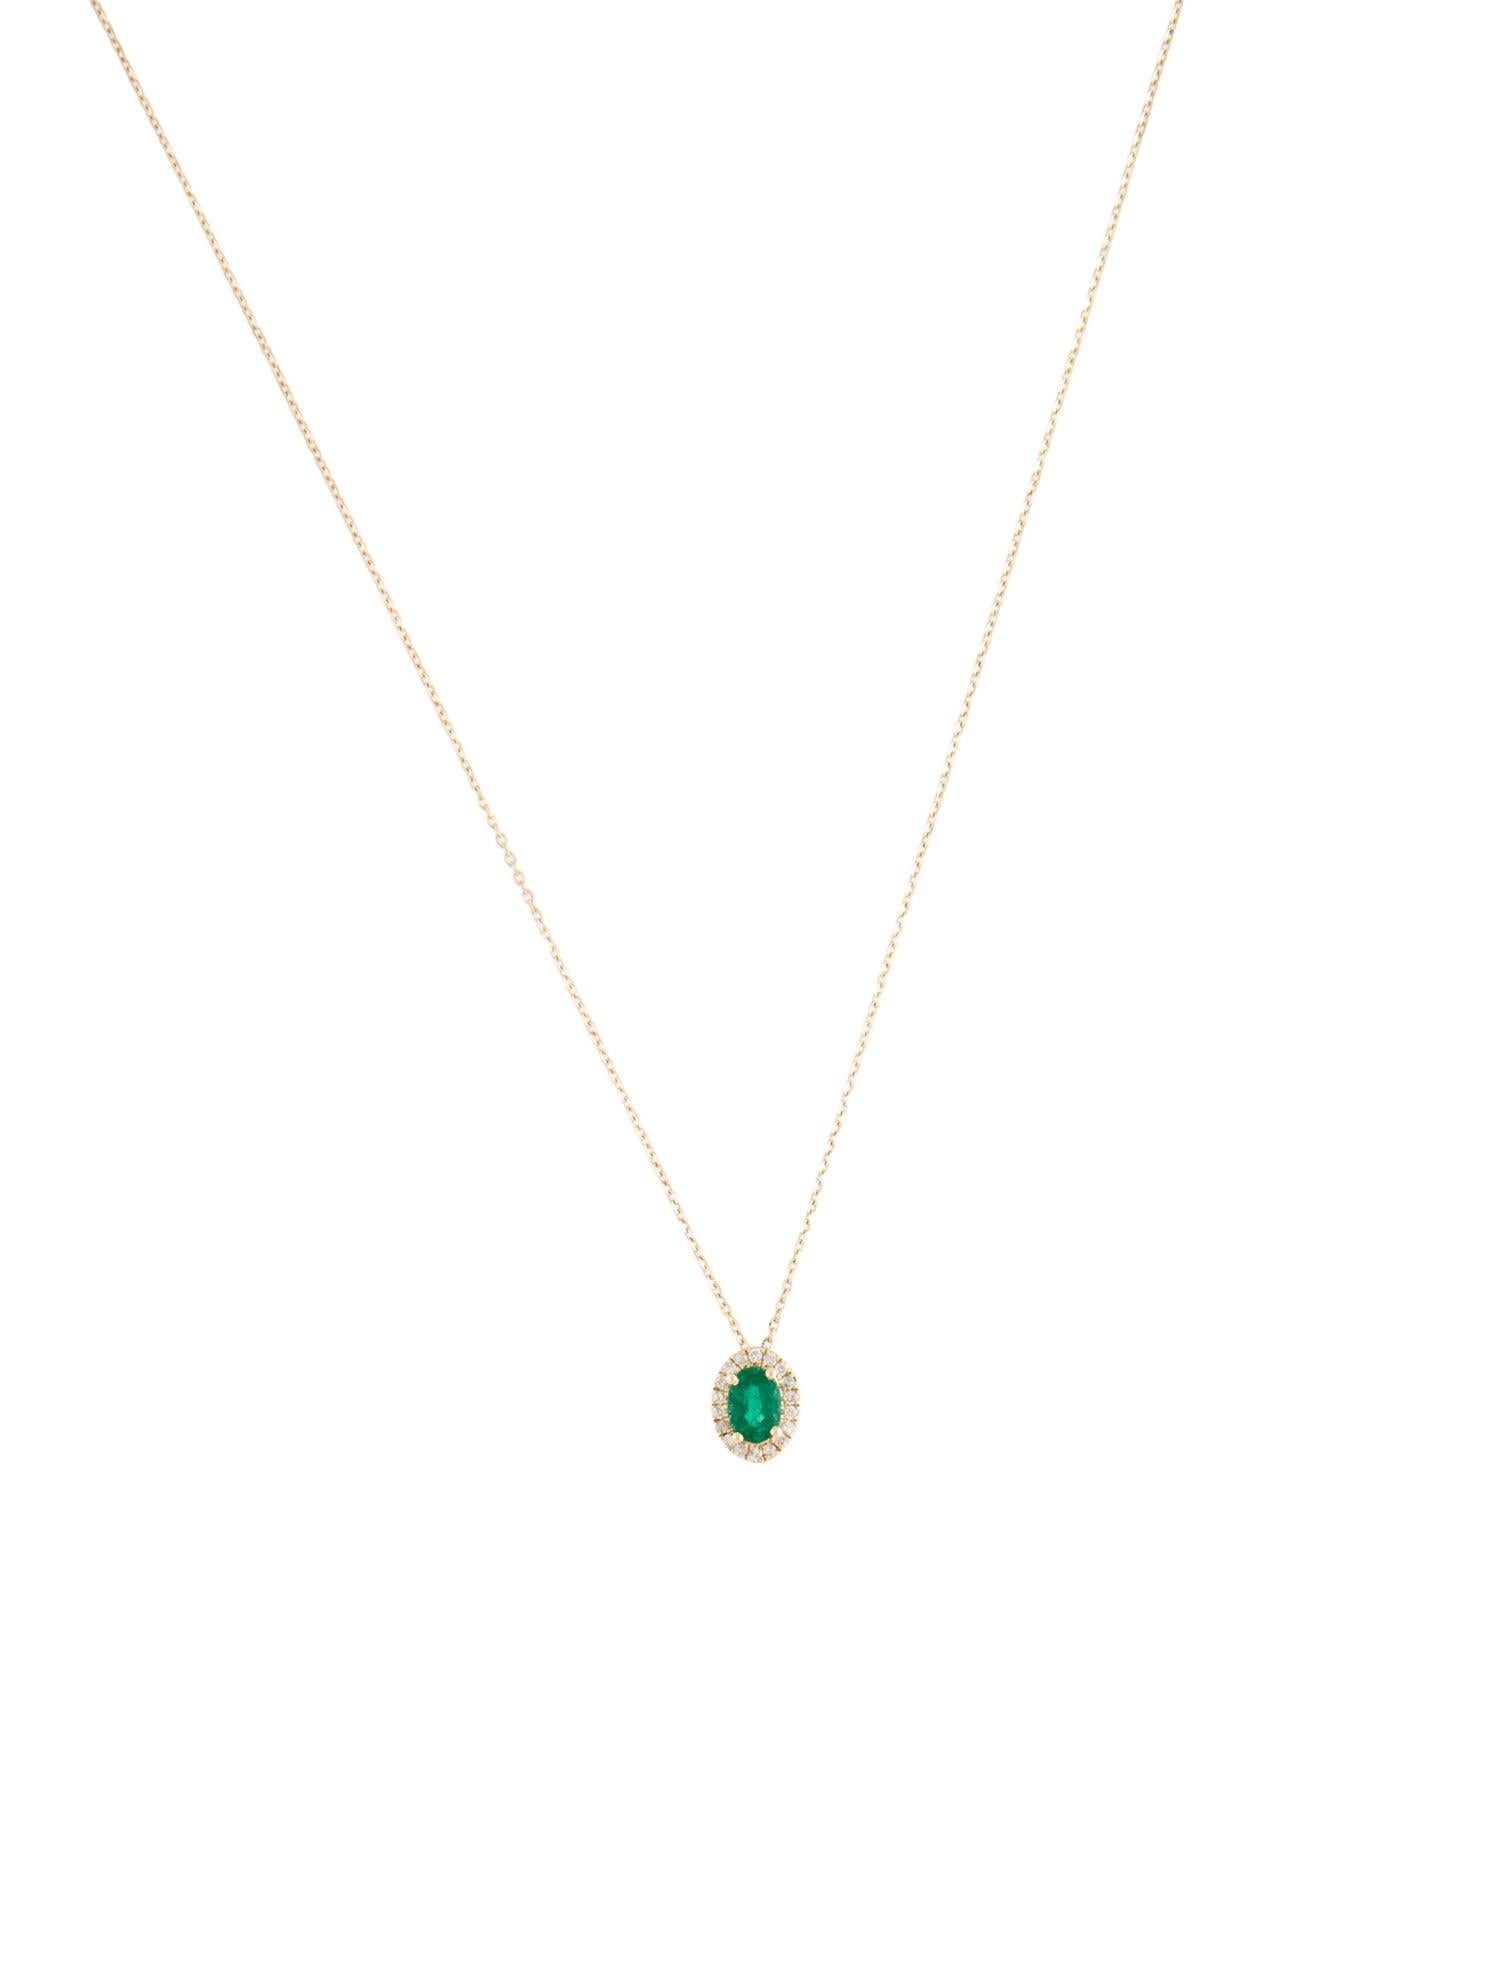 Immerse yourself in the enchanting beauty of nature with our Forest Ferns collection. This exquisite pendant is a testament to the lush, verdant forests that inspire us. Featuring a captivating oval-cut emerald, reminiscent of the vibrant foliage,